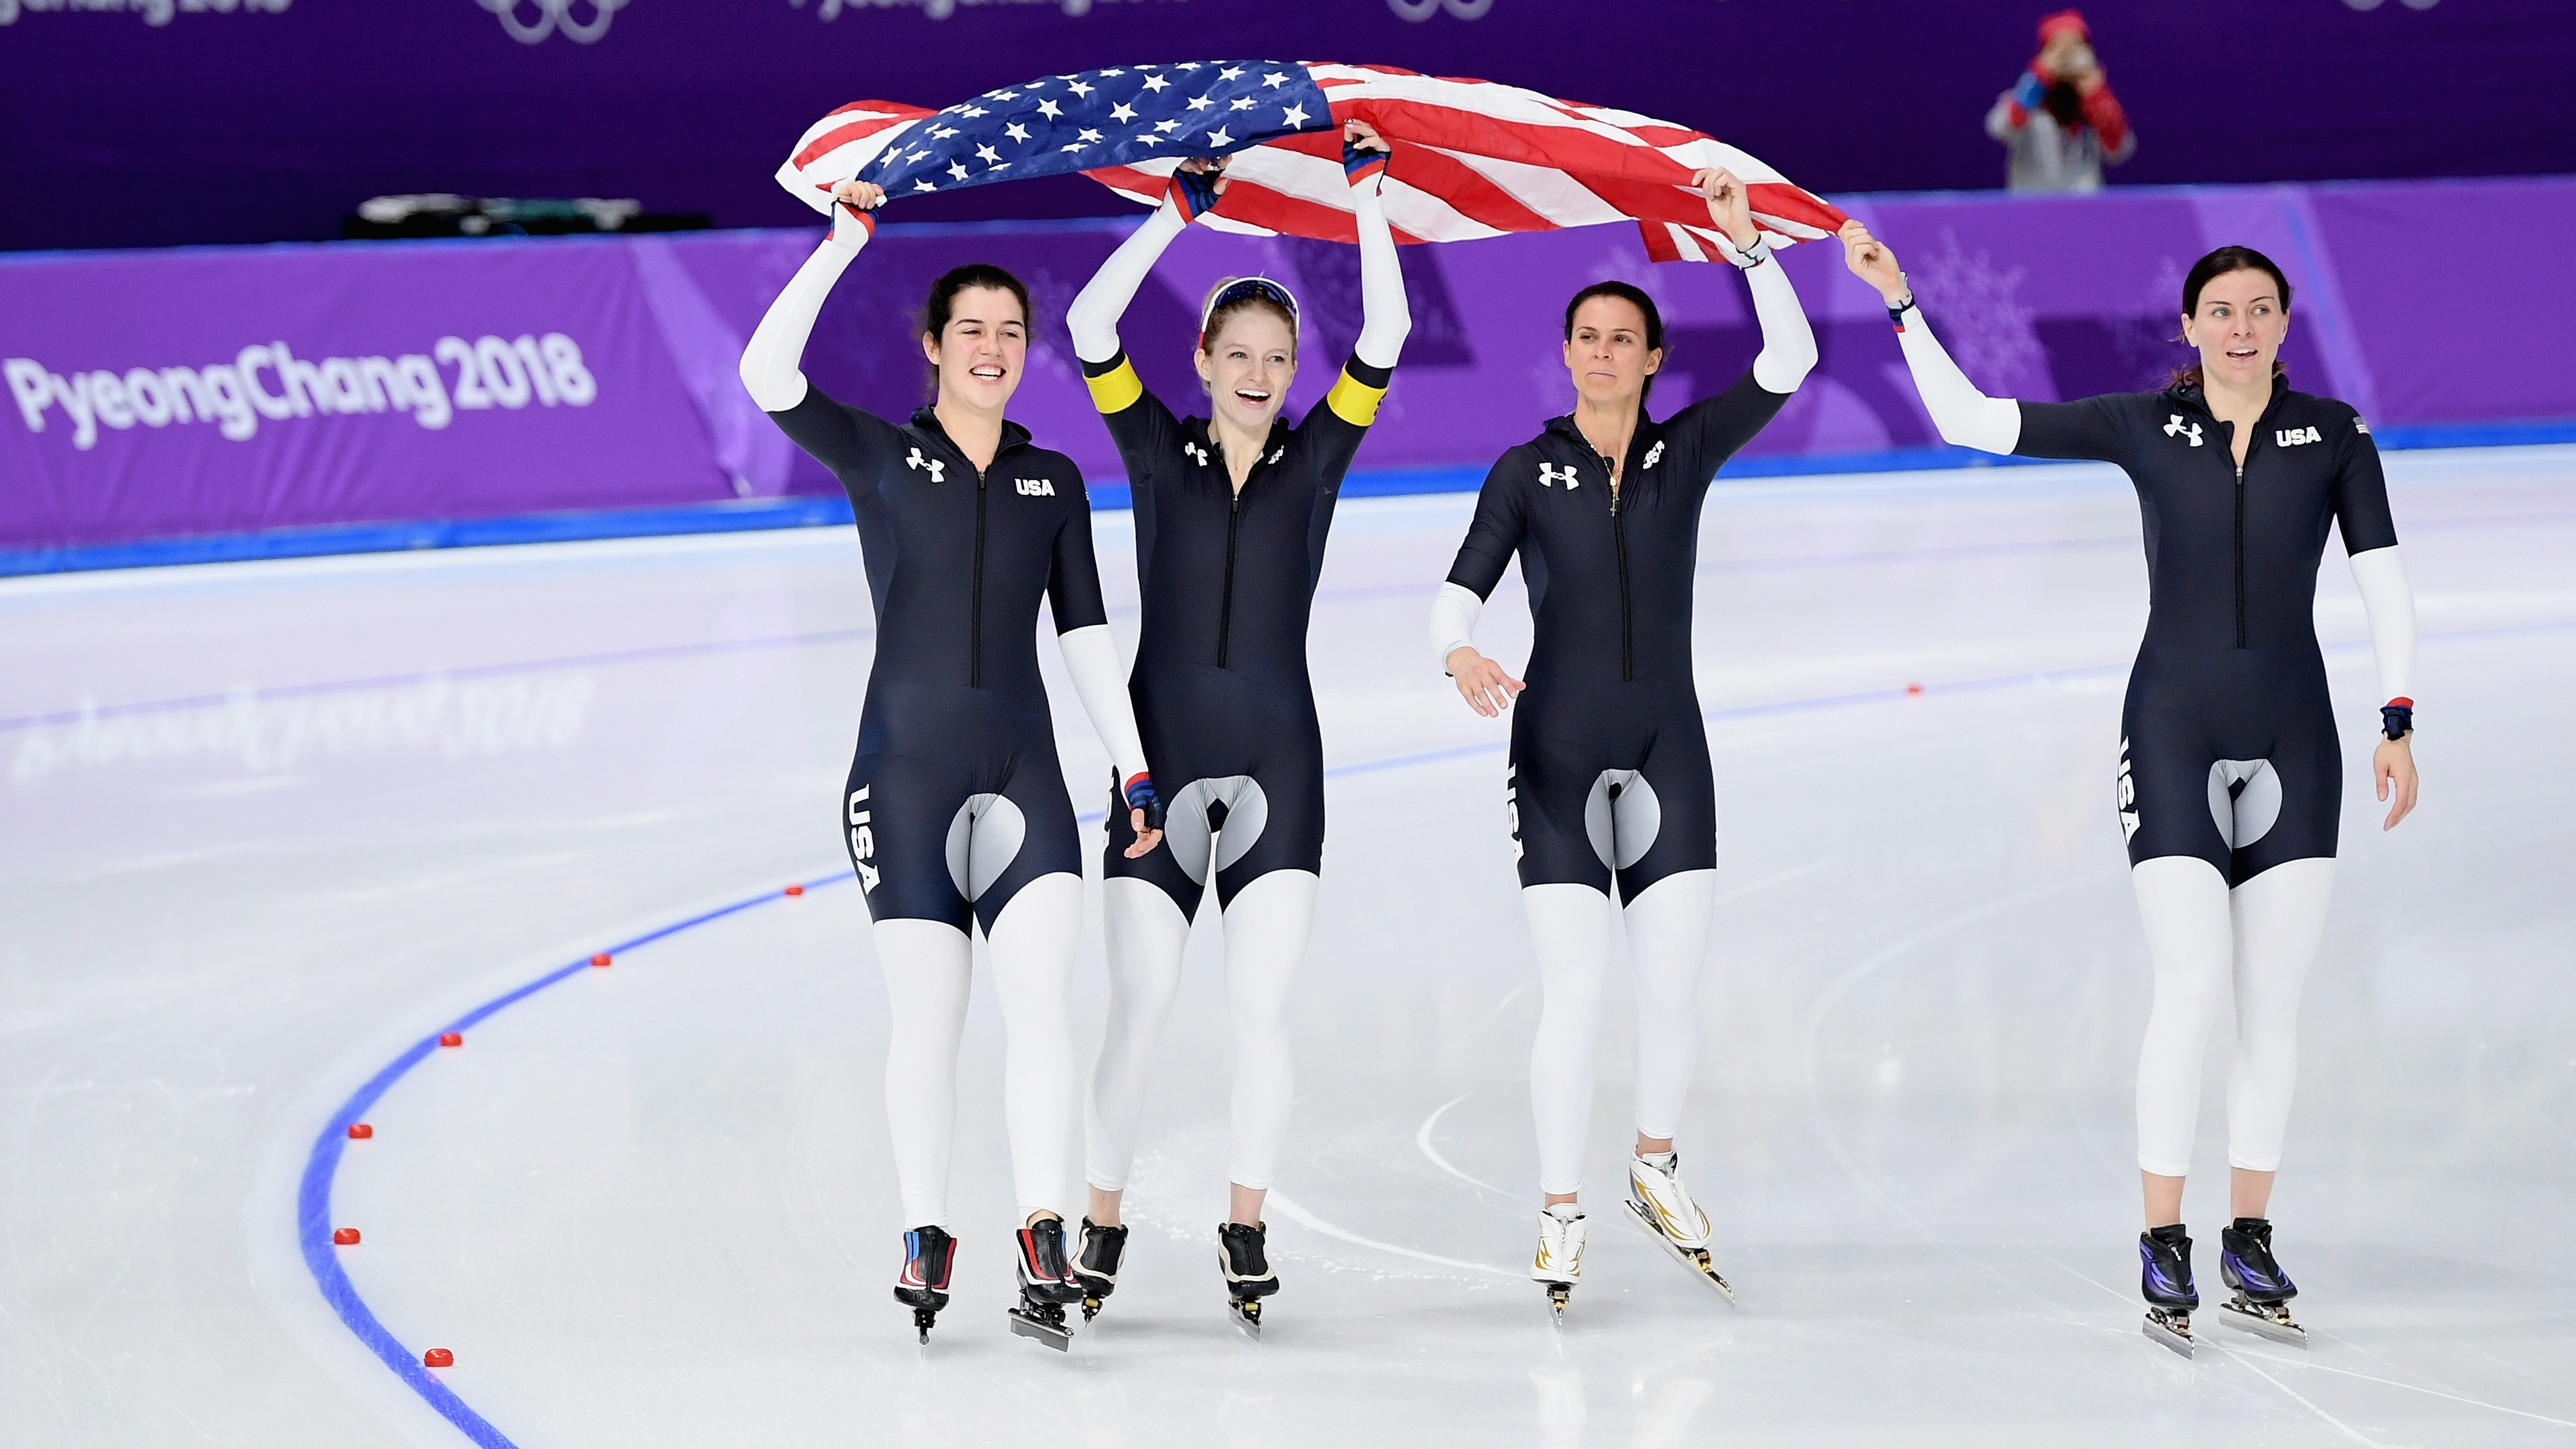 U.S. women's speed skating wins first medal in 16 years | NBC Olympics